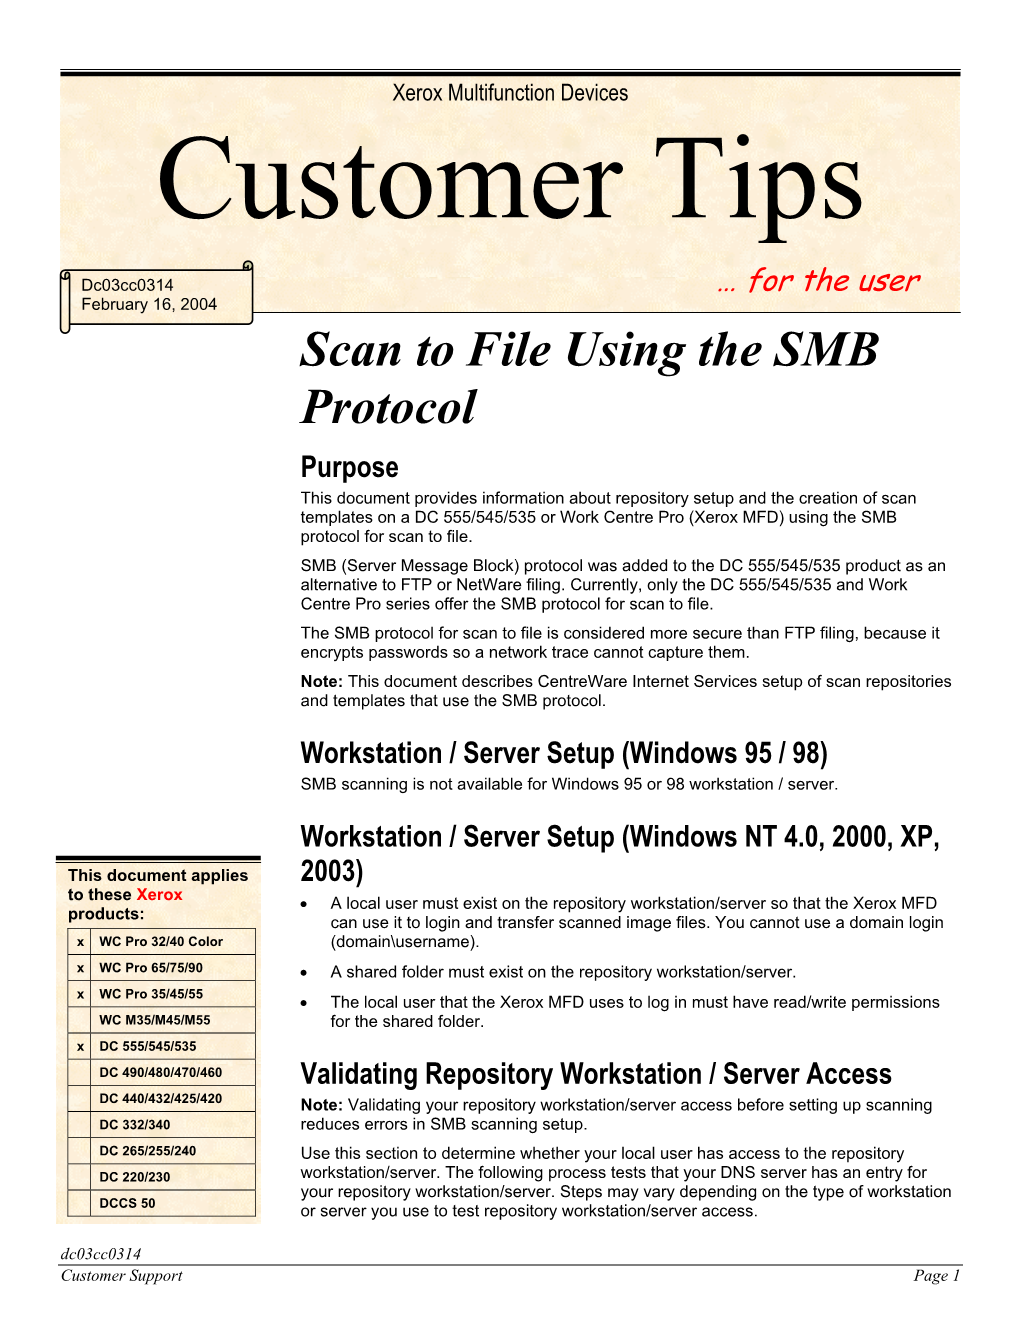 Scan to File Using the SMB Protocol